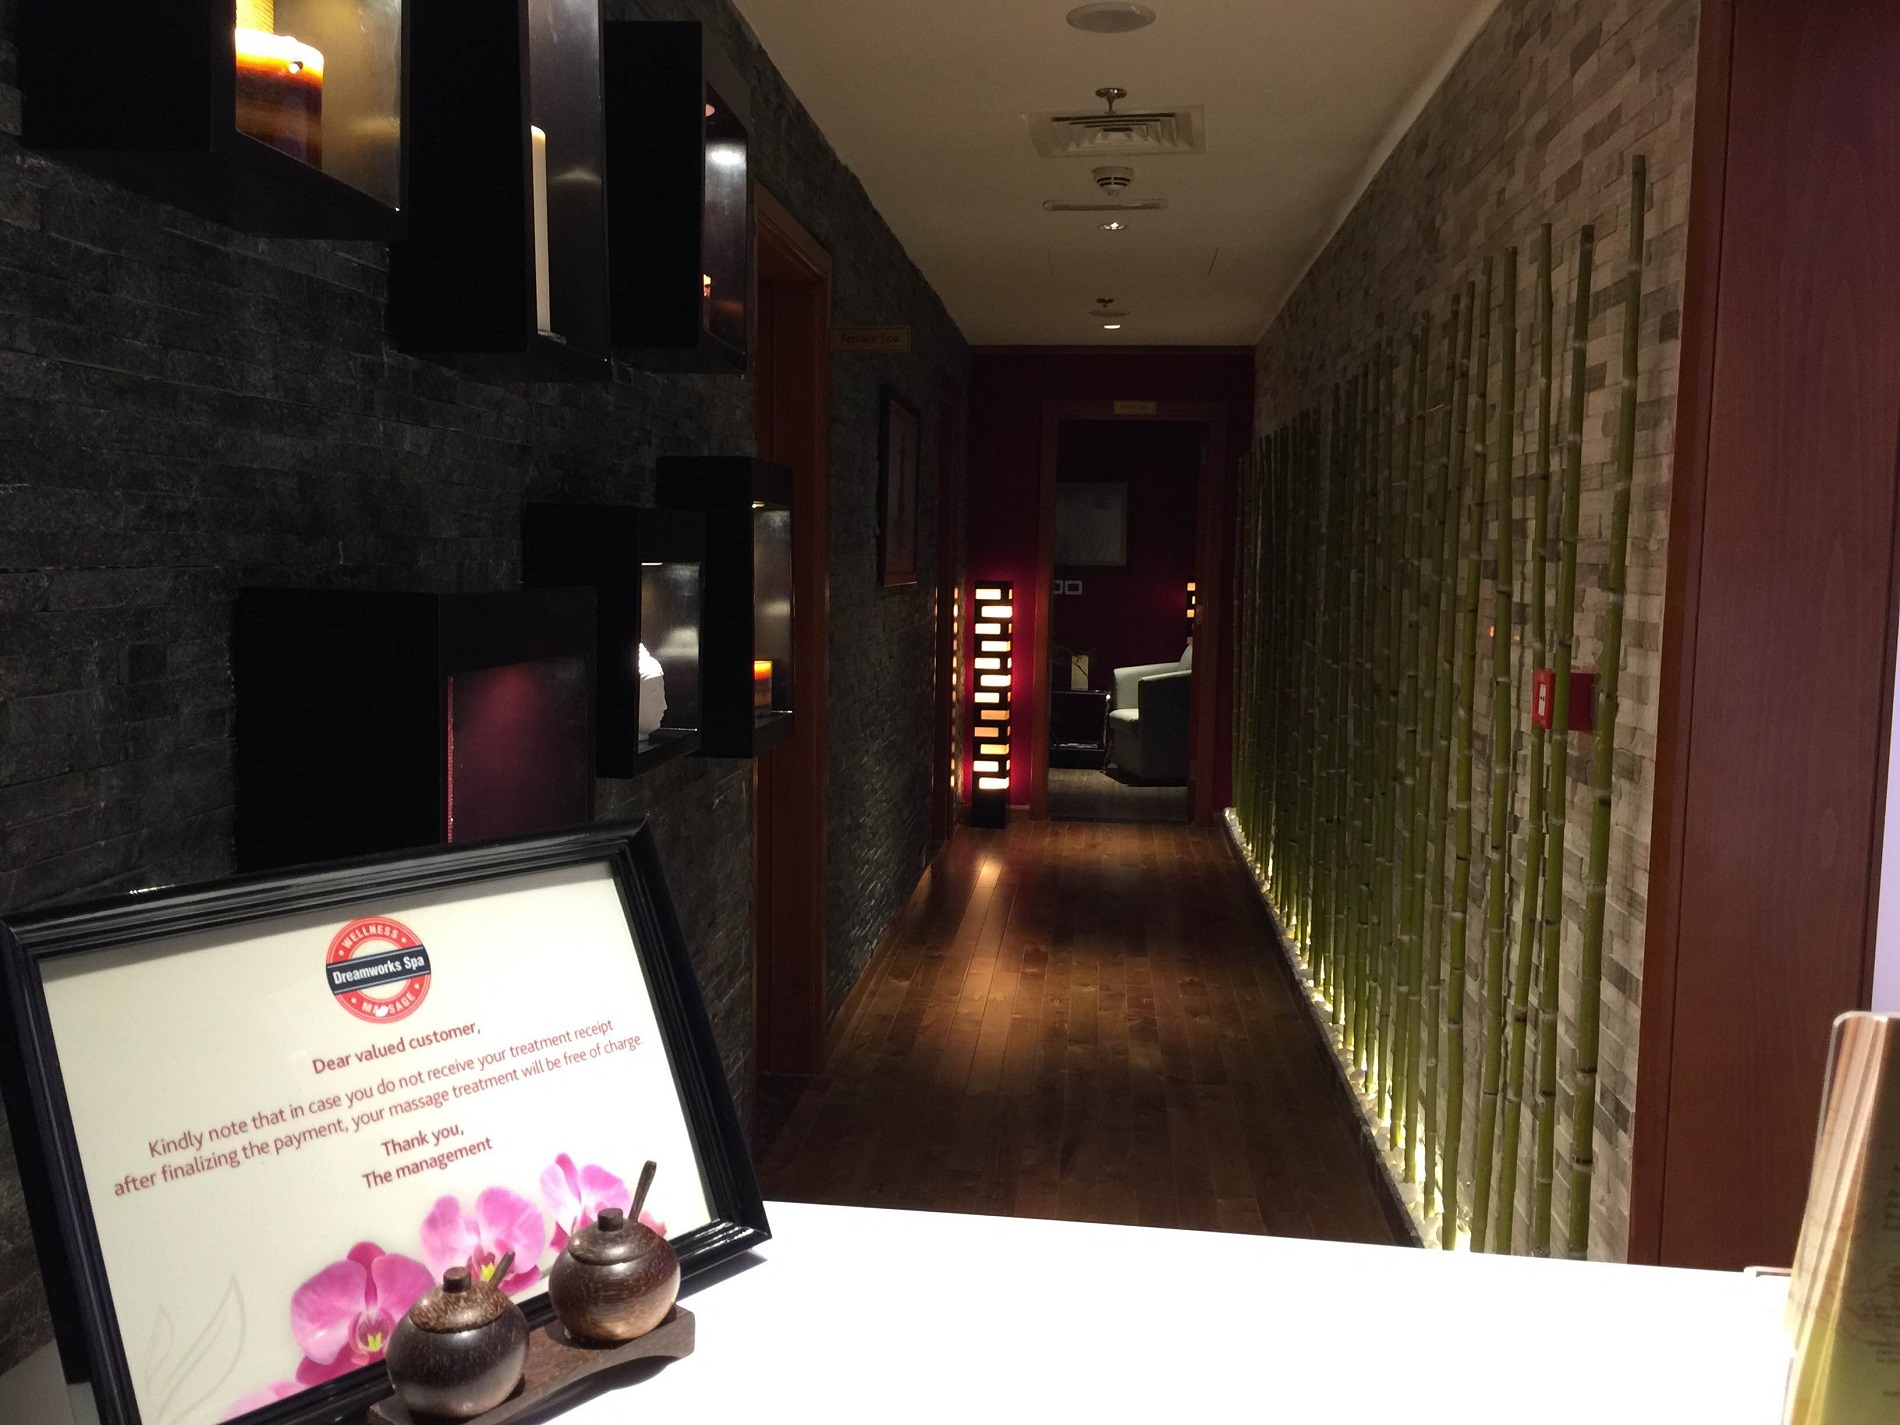 {"id":7,"facility_id":6,"lang_id":1,"hotel_id":201000002,"name":"Dreamworks Spa","slug":"dreamworks-spa","description":"<p>Located on ground floor. Offers a variety of Balinese massage services with separate treatment rooms for ladies and gents.<\/p>\r\n\r\n<p>For booking, contact&nbsp;<a href=\"tel:+97145014427\">+97145014427<\/a><\/p>\r\n\r\n<p>[break]<\/p>\r\n\r\n<table class=\"table table-dark table-striped table-bordered\">\r\n\t<thead>\r\n\t\t<tr>\r\n\t\t\t<th>Facility<\/th>\r\n\t\t\t<th>Timing<\/th>\r\n\t\t<\/tr>\r\n\t<\/thead>\r\n\t<tbody>\r\n\t\t<tr>\r\n\t\t\t<td>Dreamworks Spa<\/td>\r\n\t\t\t<td>10:00 am to 10:00 pm<\/td>\r\n\t\t<\/tr>\r\n\t<\/tbody>\r\n<\/table>","sort":2,"status":1,"created_at":"2019-10-30T07:22:50.000000Z","updated_at":"2019-11-22T11:00:45.000000Z","deleted_at":null,"image_slider":{"id":1355,"lang_id":1,"image_sliderable_id":7,"image_sliderable_type":"App\\HotelFacility","image_slider":"uploads\/image-slider\/eff6345178698563ac3697e190ec25c31576683055.jpg","name":null,"sub_name":null,"content":null,"status":1,"created_at":"2019-12-18T15:30:55.000000Z","updated_at":"2019-12-18T15:30:55.000000Z","sort":null,"is_mobile":0}}-slider